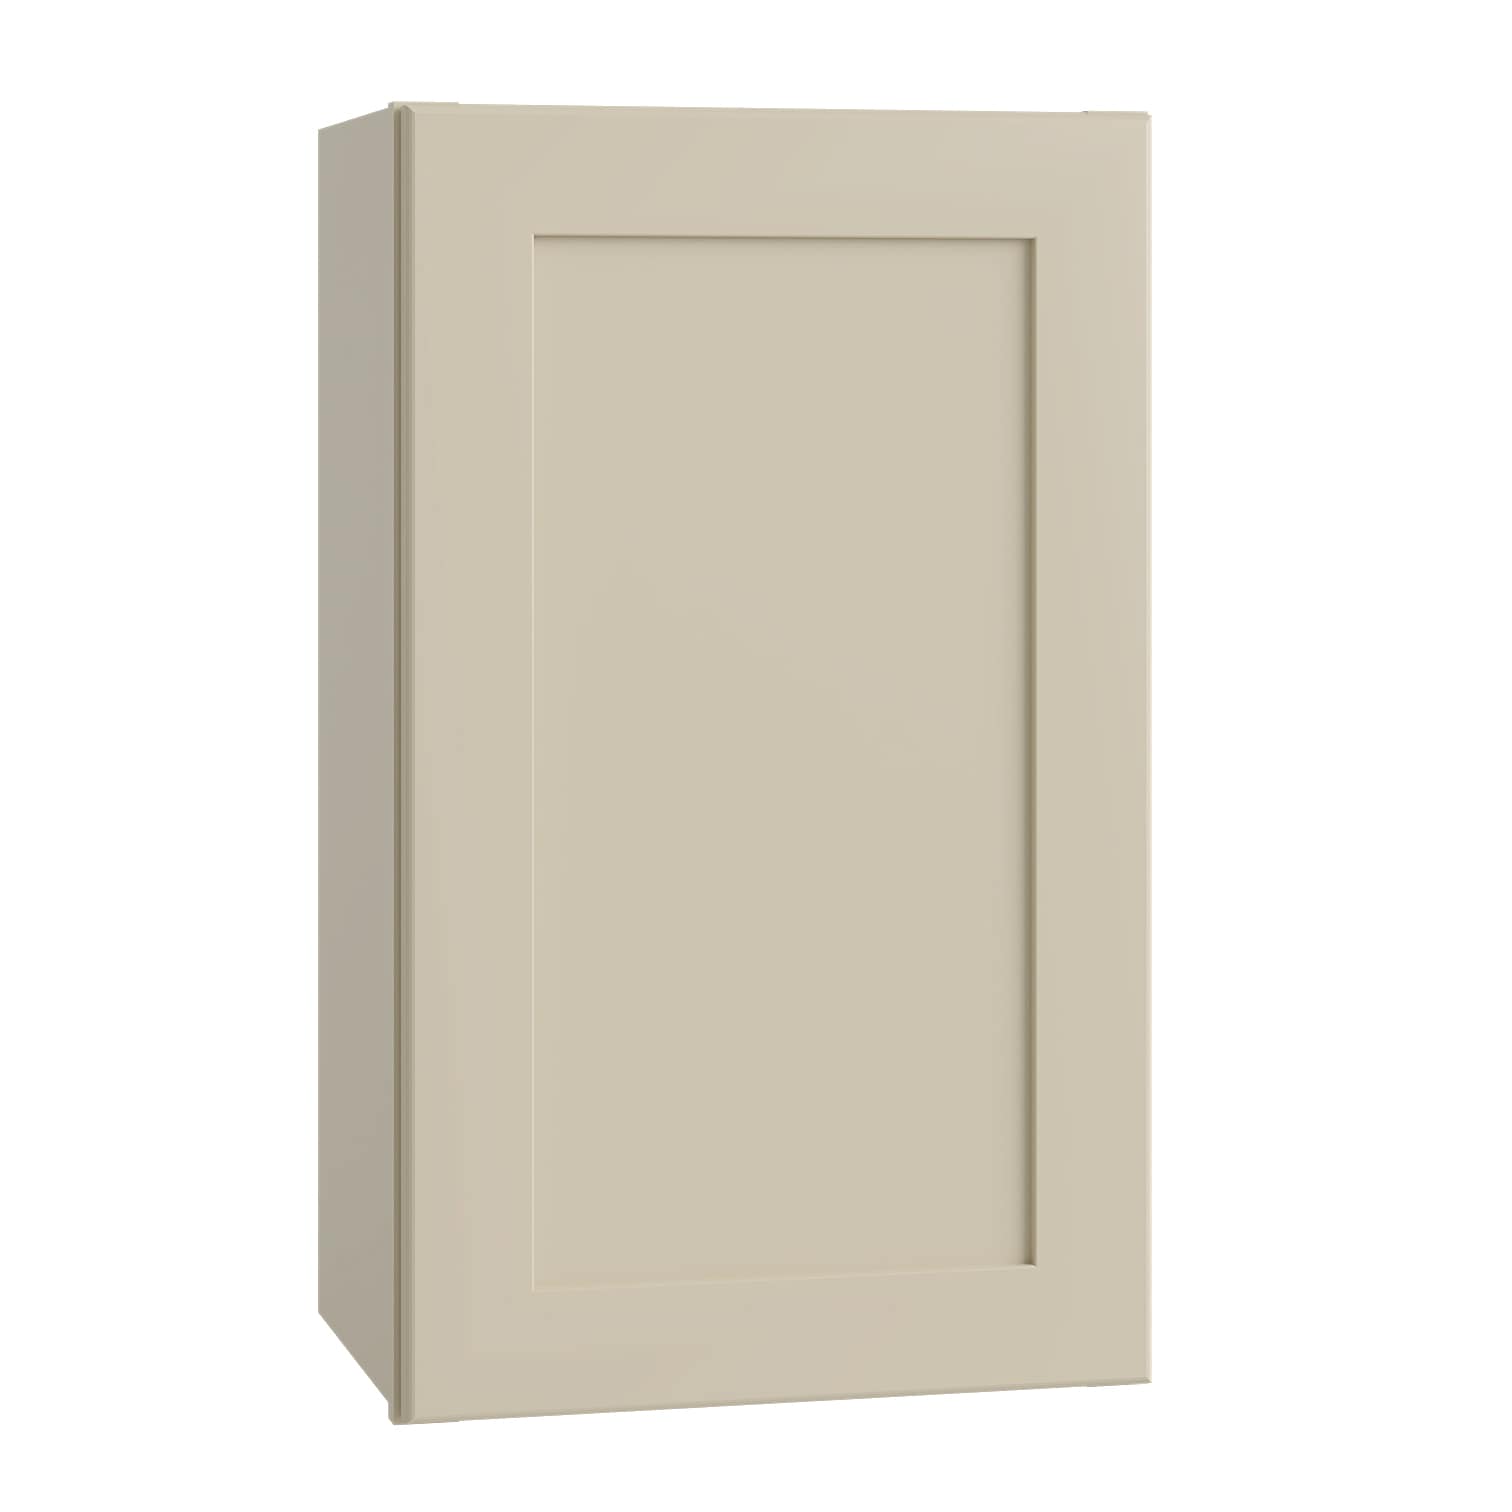 Luxxe Cabinetry 21-in W x 30-in H x 12-in D Norfolk Blended Cream Painted Door Wall Fully Assembled Semi-custom Cabinet in Off-White | W2130L-NBC